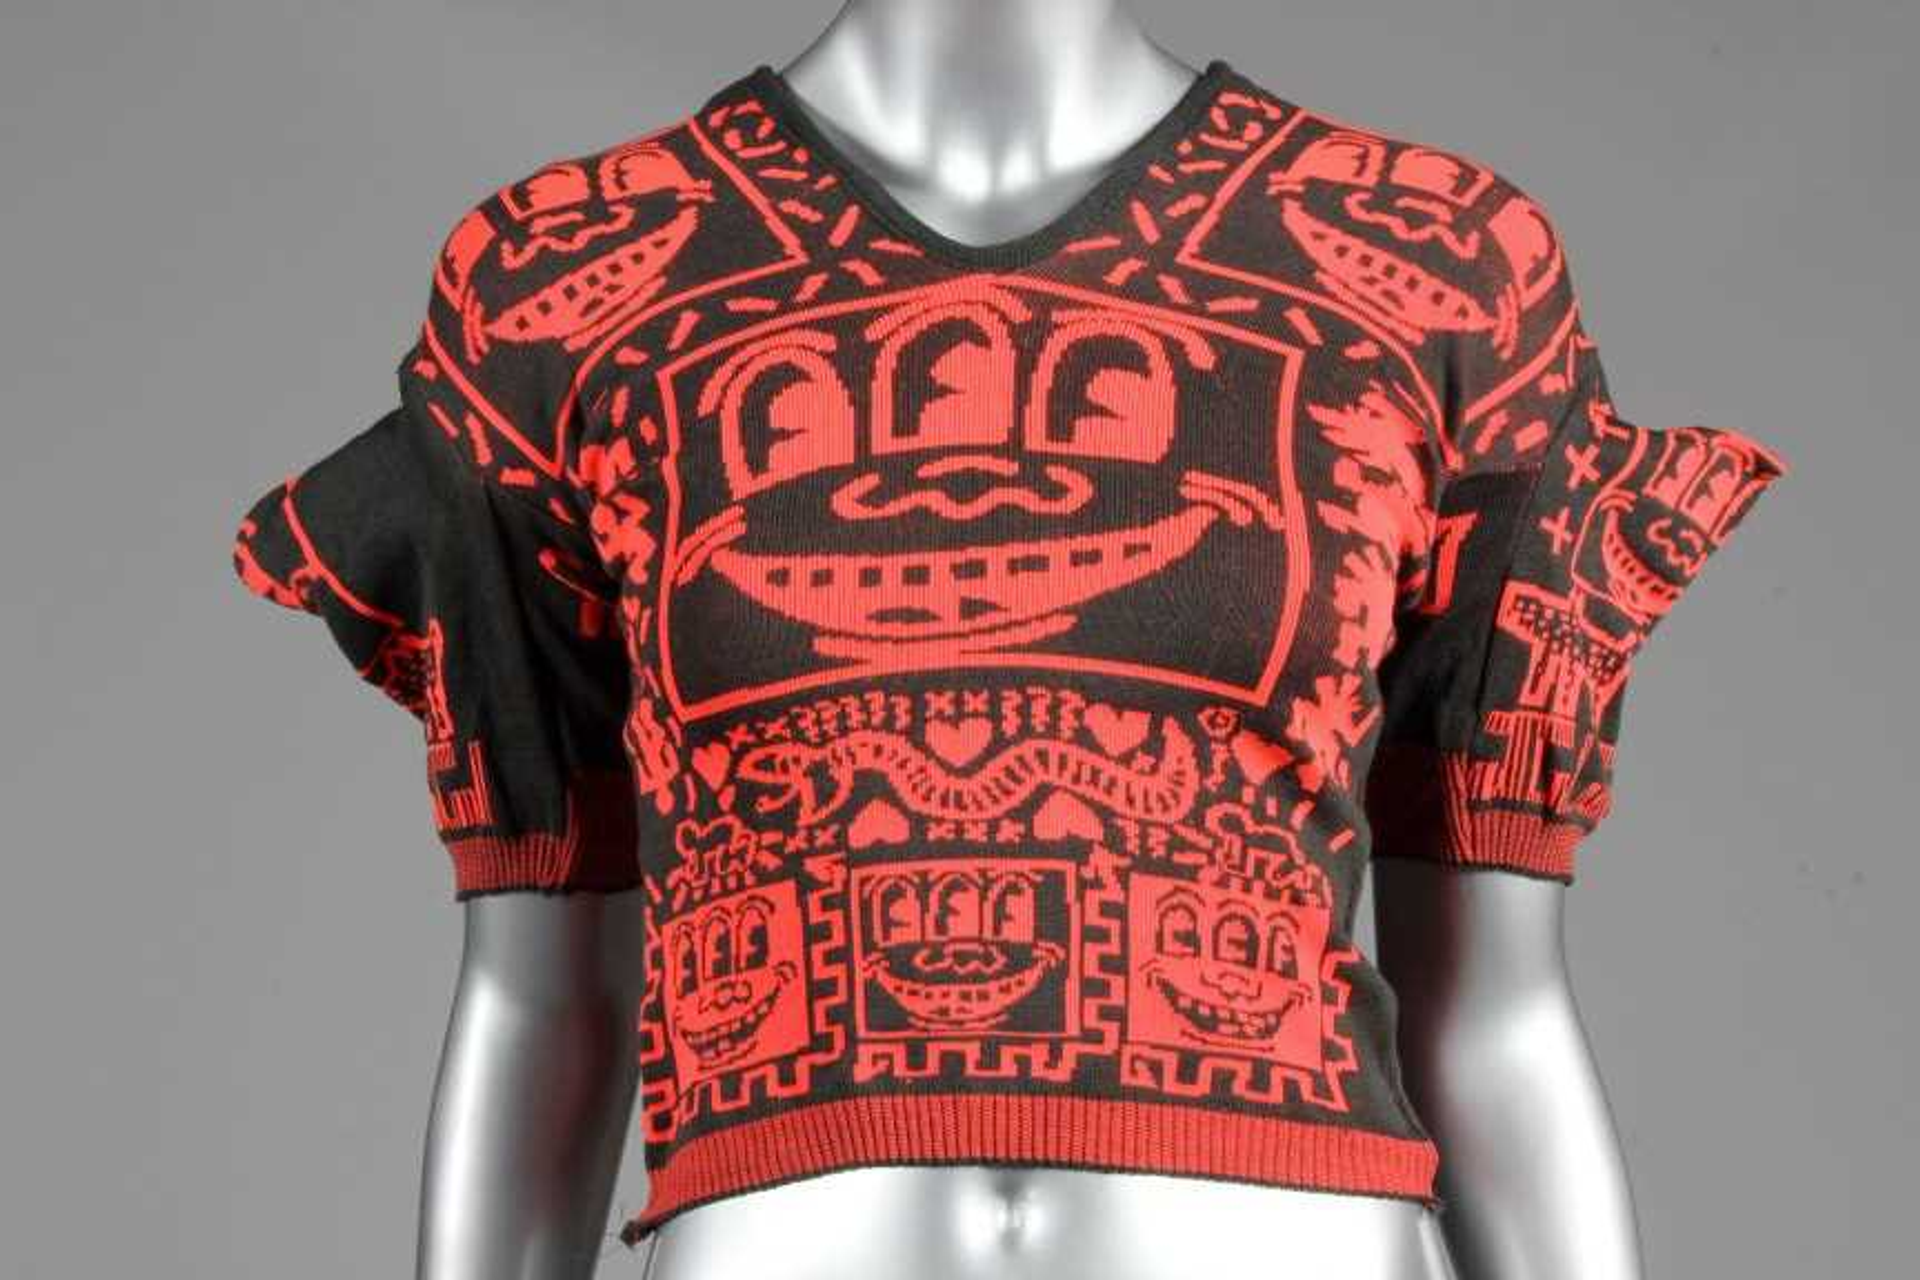 An image of a mannequin wearing a black and red knitted t-shirt, printed with Keith Haring's three-eyed smiley face motif.